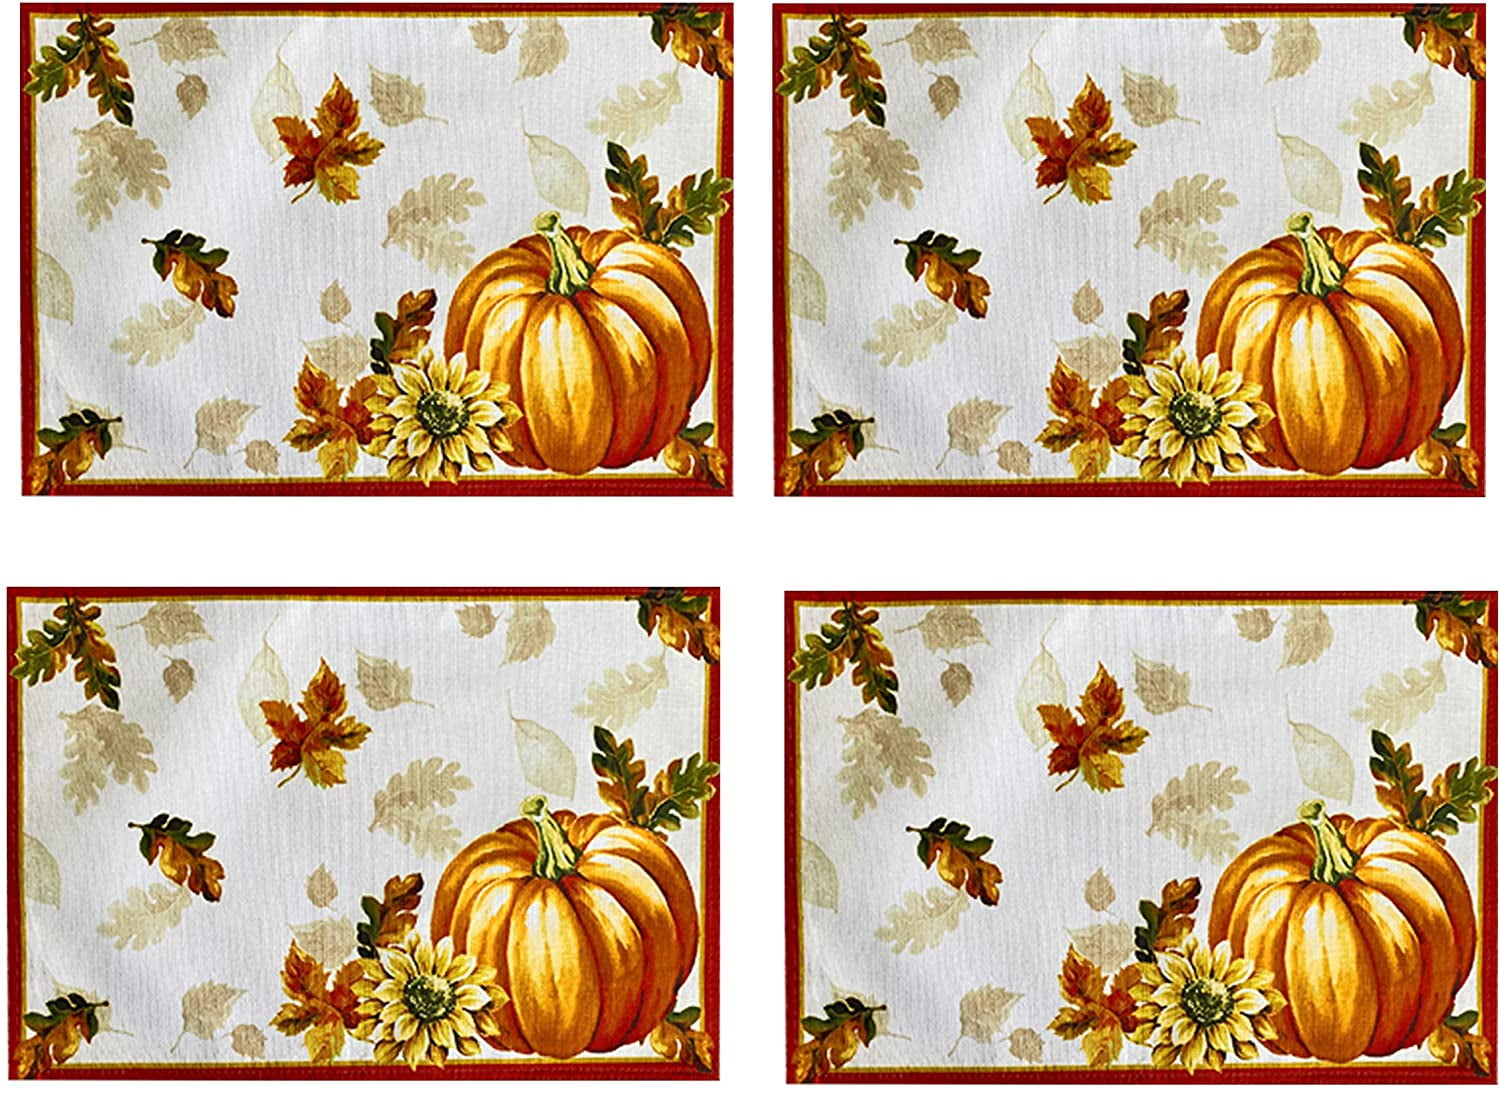 New Harvest Season Embroidered Fabric Napkins Fall Leaves Thanksgiving Set Of 4 